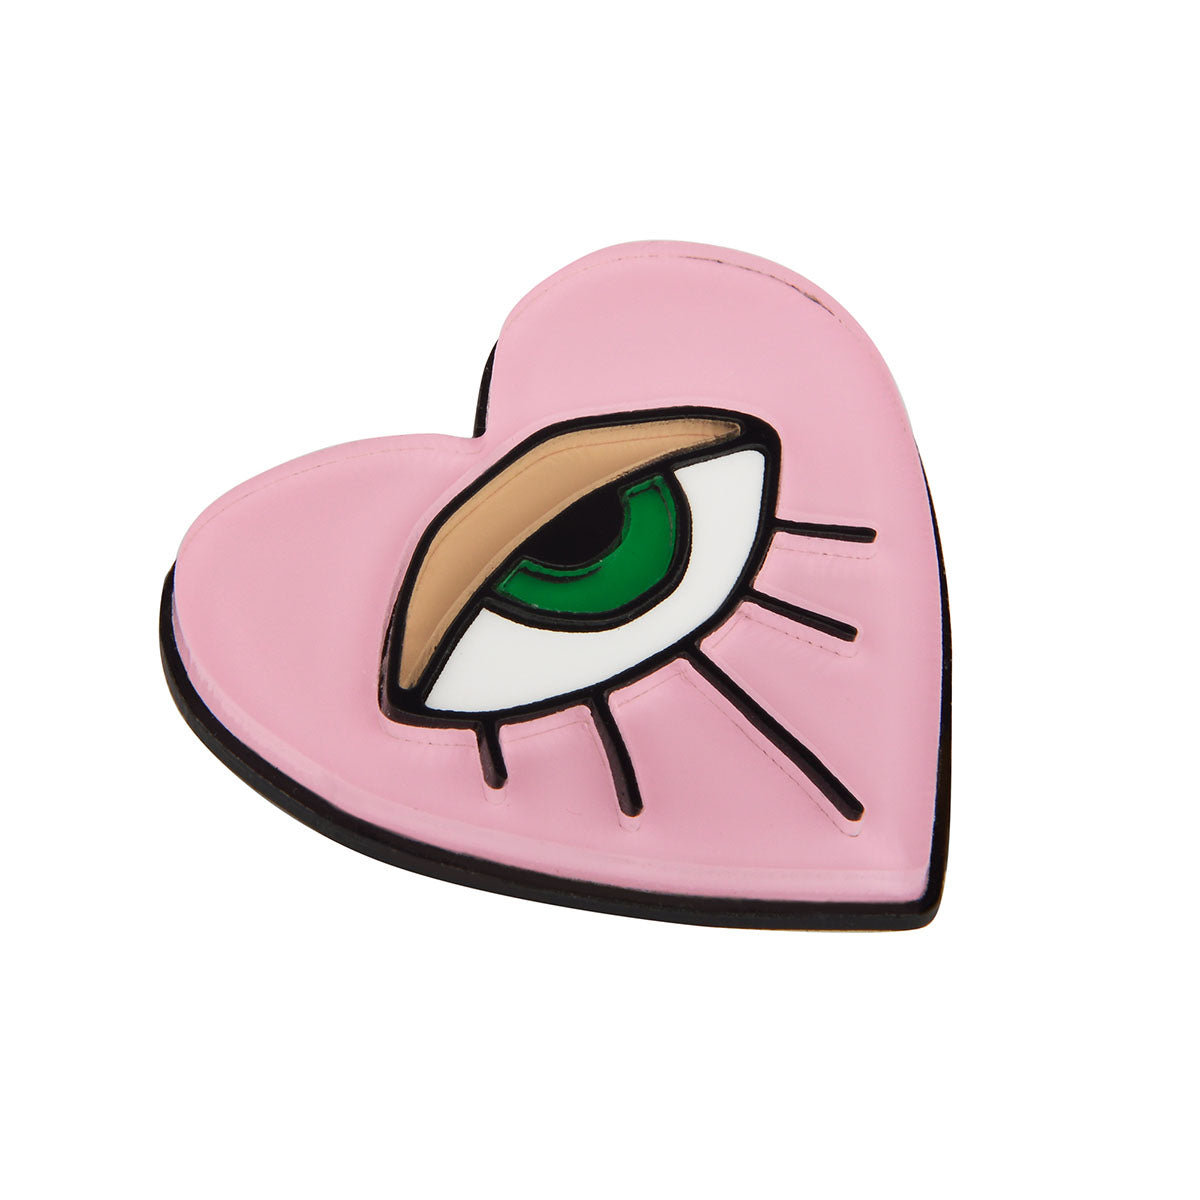 An angled view of the Eye in Heart Brooch laid flat.